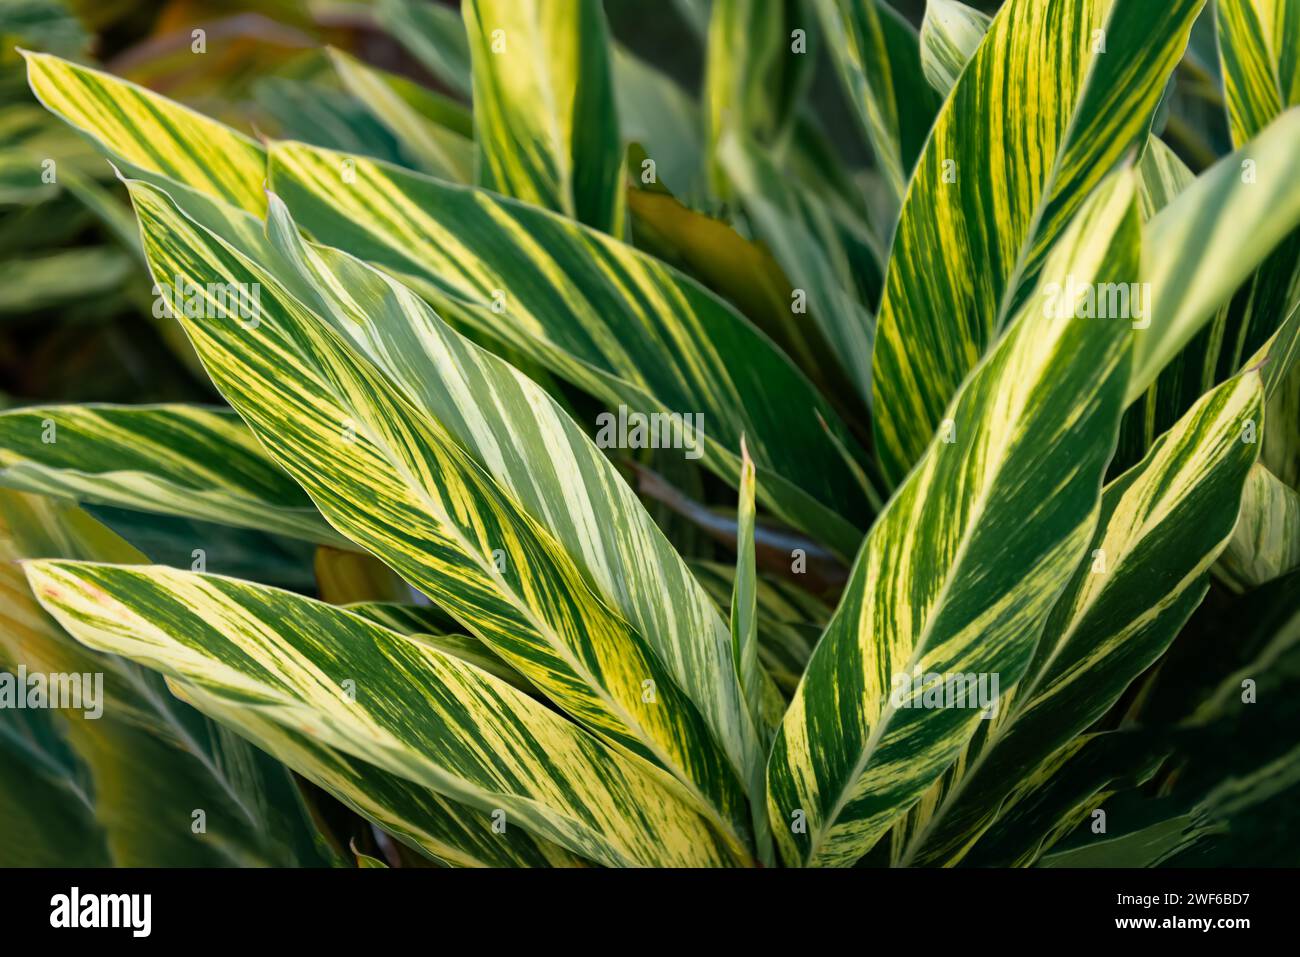 Shell ginger plant tropical foliage flora decorative ornamental striped vibrant green and yellow variegated Stock Photo